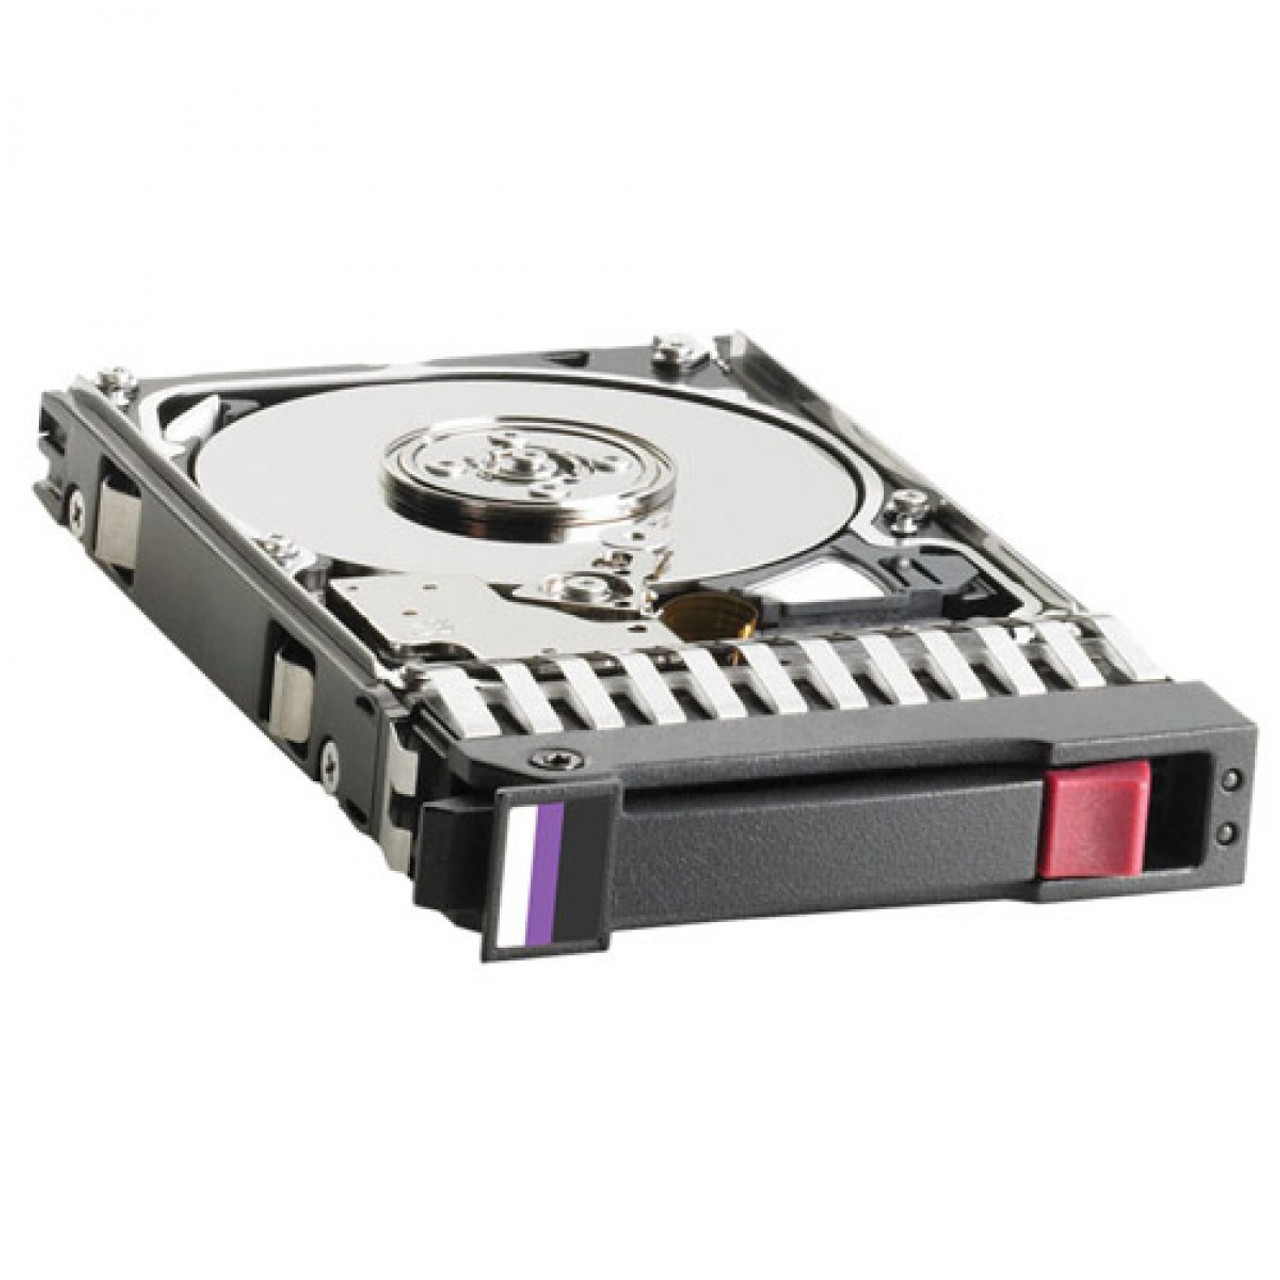 58MJK - Dell 147GB 15000RPM SAS 3GB/s 16MB Cache 3.5-inch Hard Drive with Tray